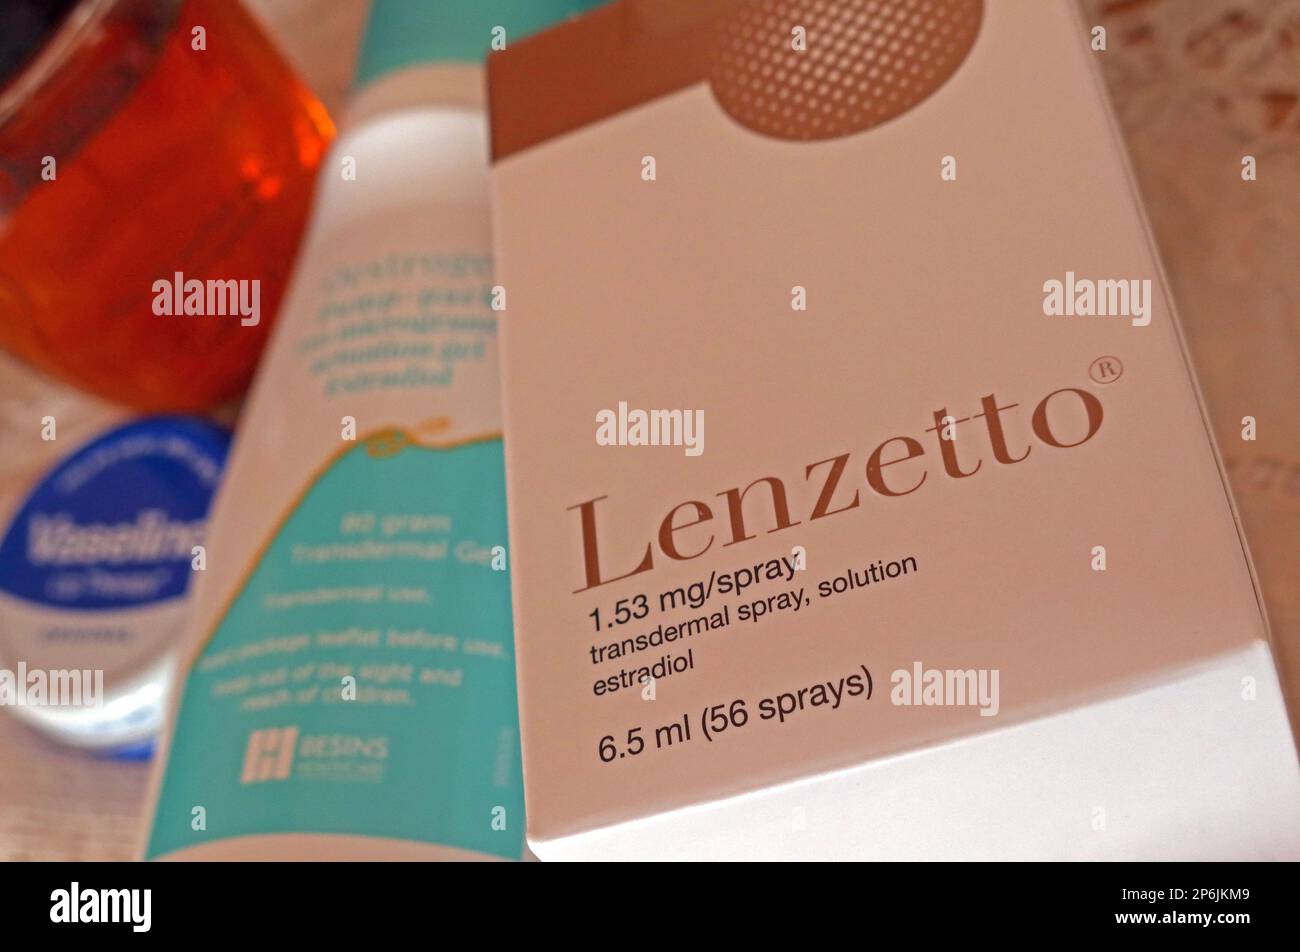 Lenzetto transderma spray solution, estradiol, female menopause HRT ( Hormone Replacement Treatment Therapy ), on a bedroom table Stock Photo